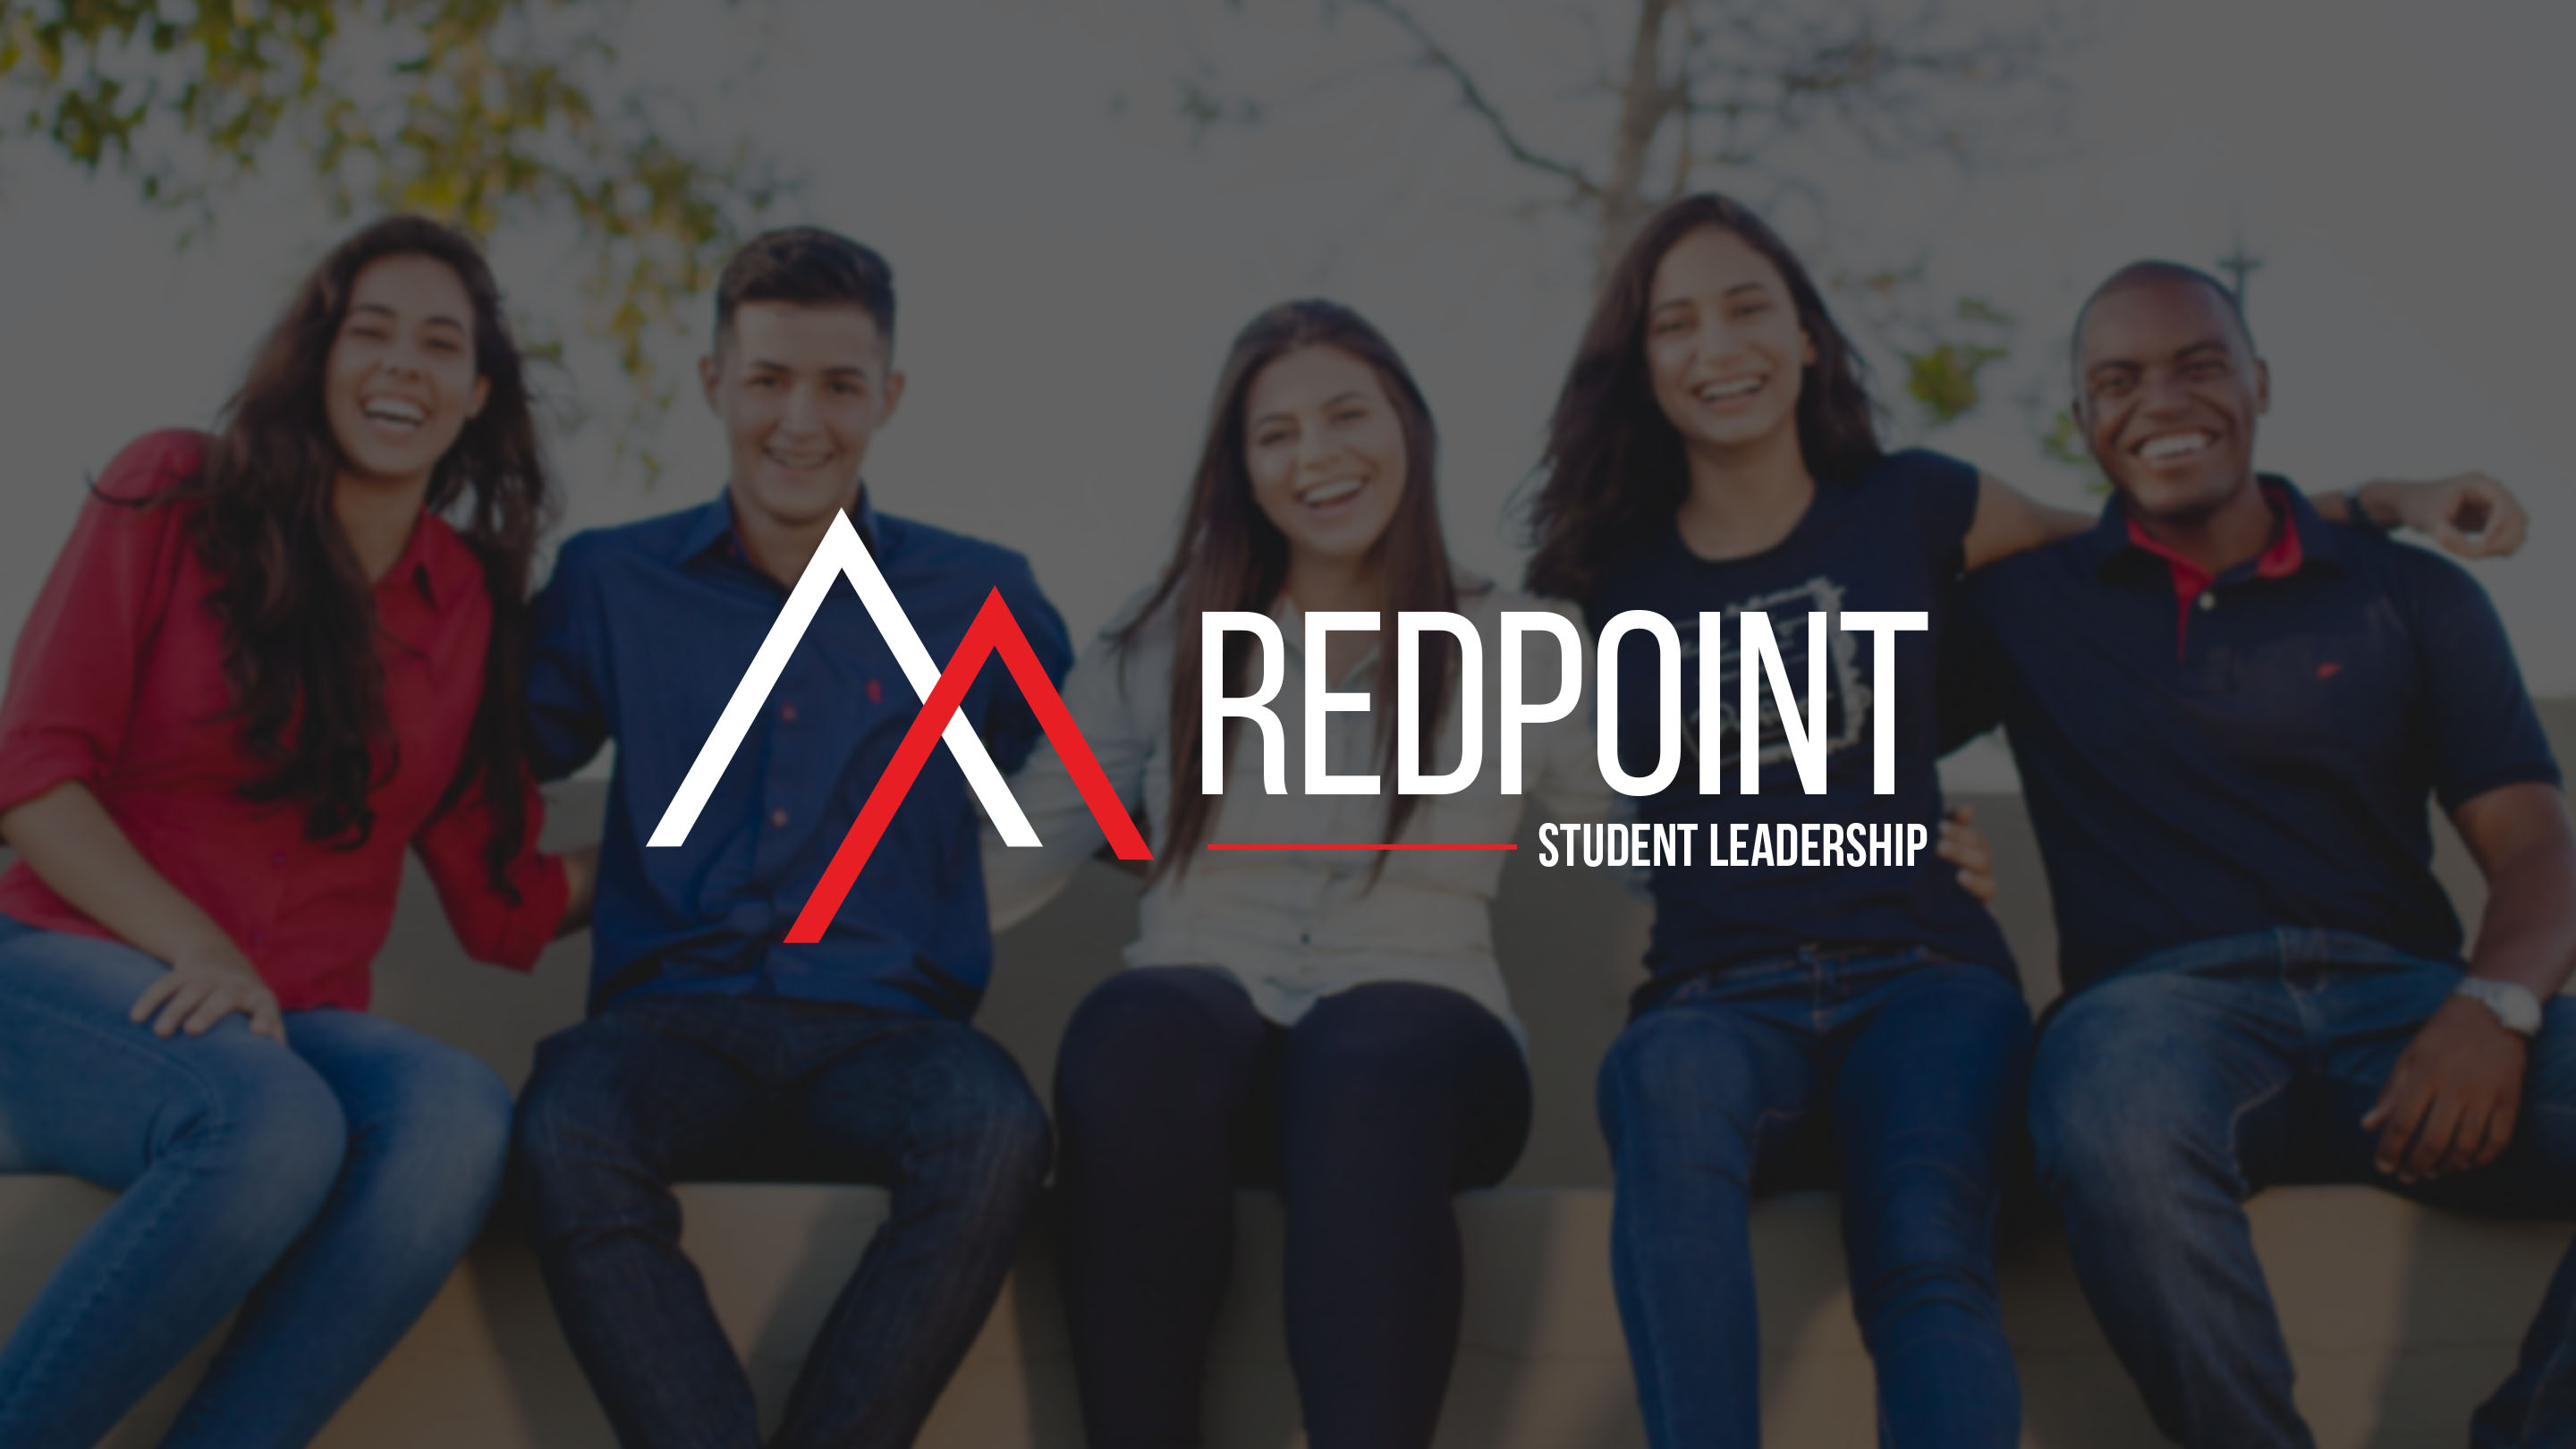 Redpoint Leadership

Team for 7th-12th grade students
Equipping students to learn, lead, and live out the purposes of God!
